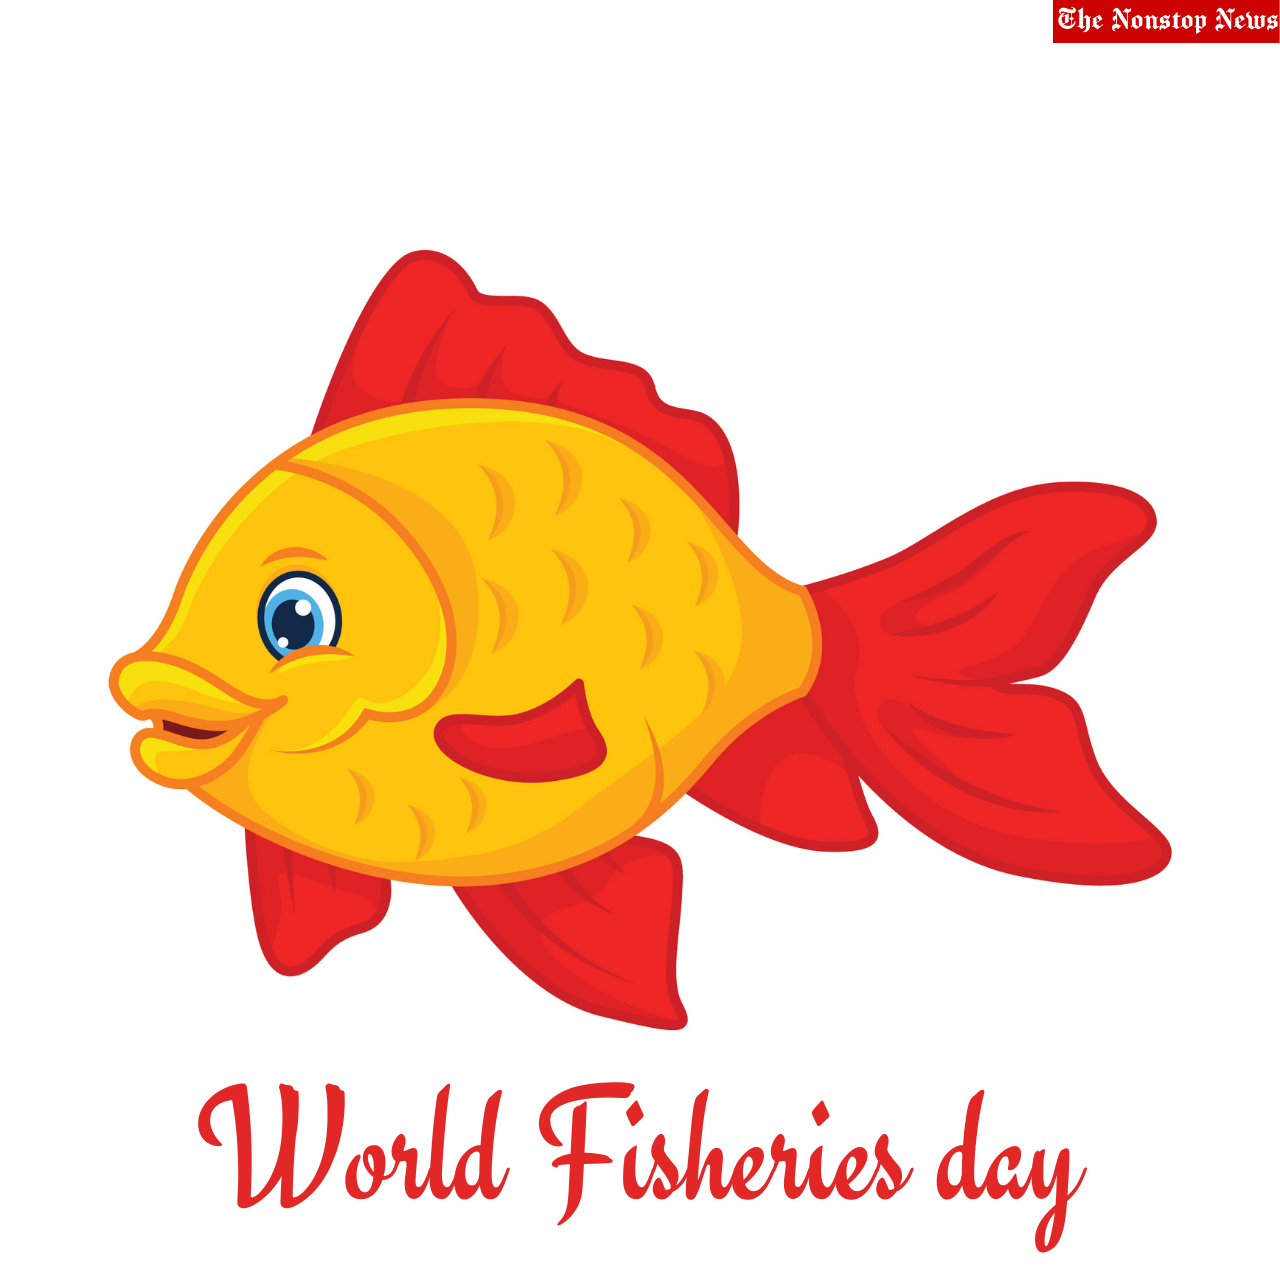 World Fisheries day 2021 Quotes, Poster, Images, Messages, and Slogans to create awareness